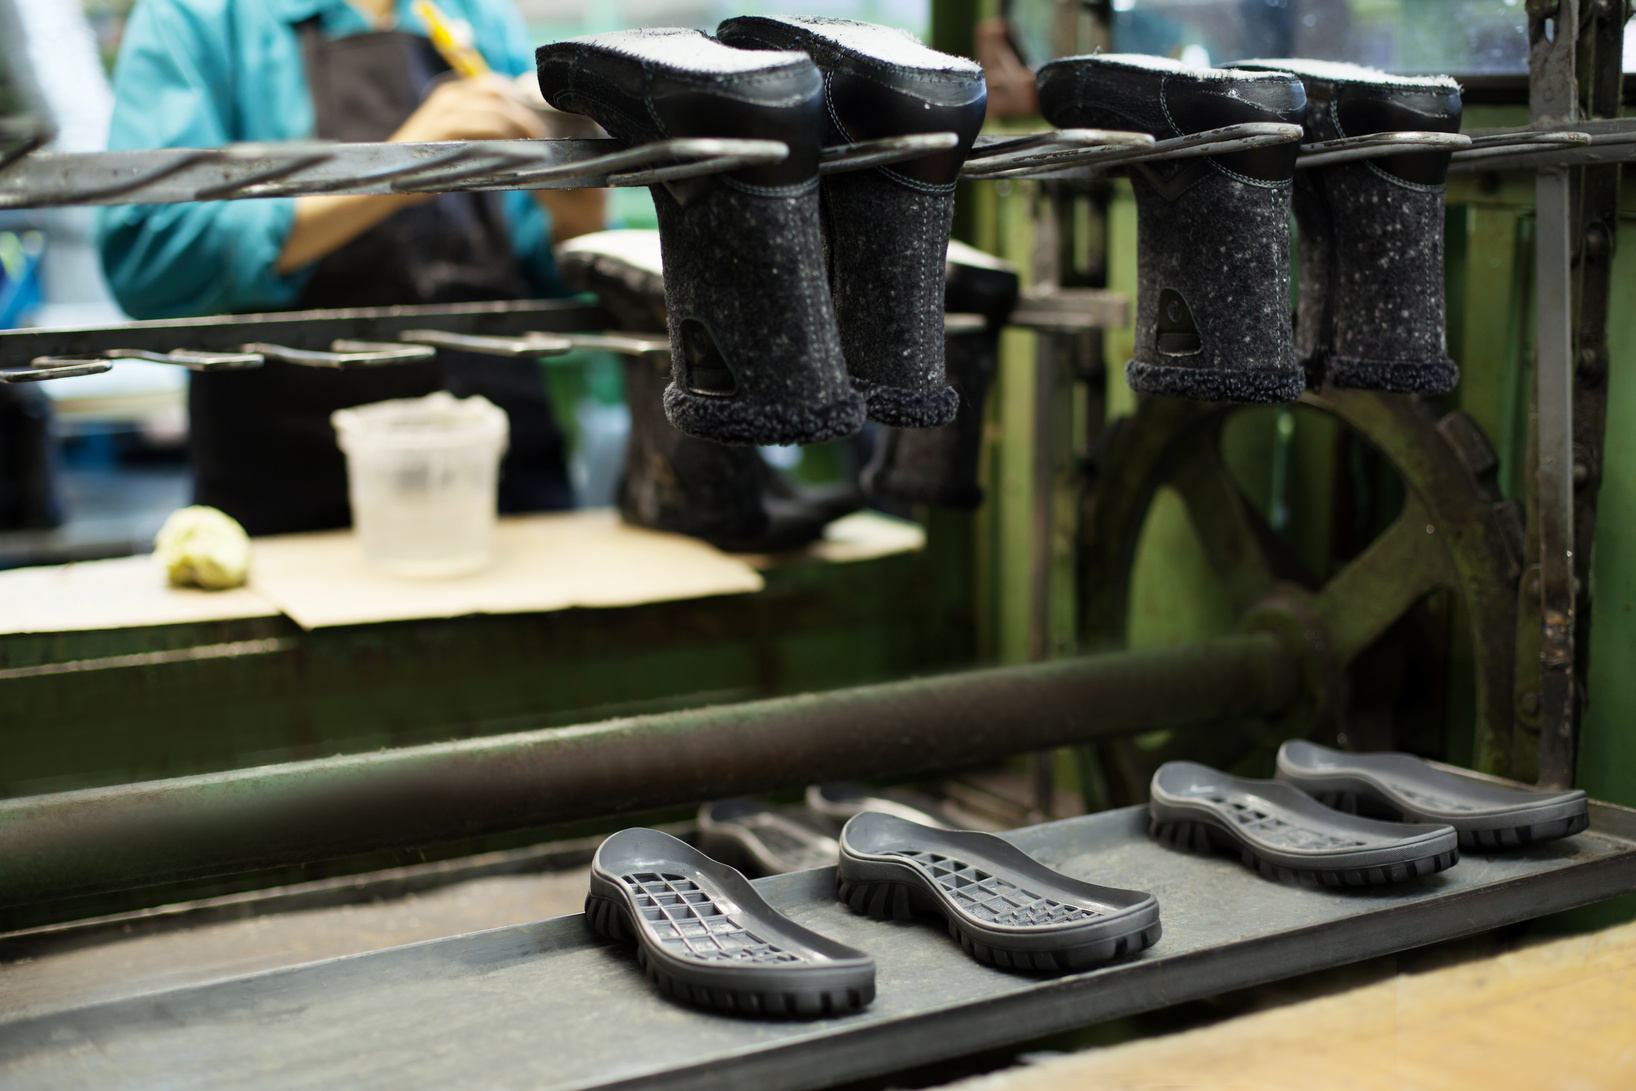 Footwear production - boots and rubber soles